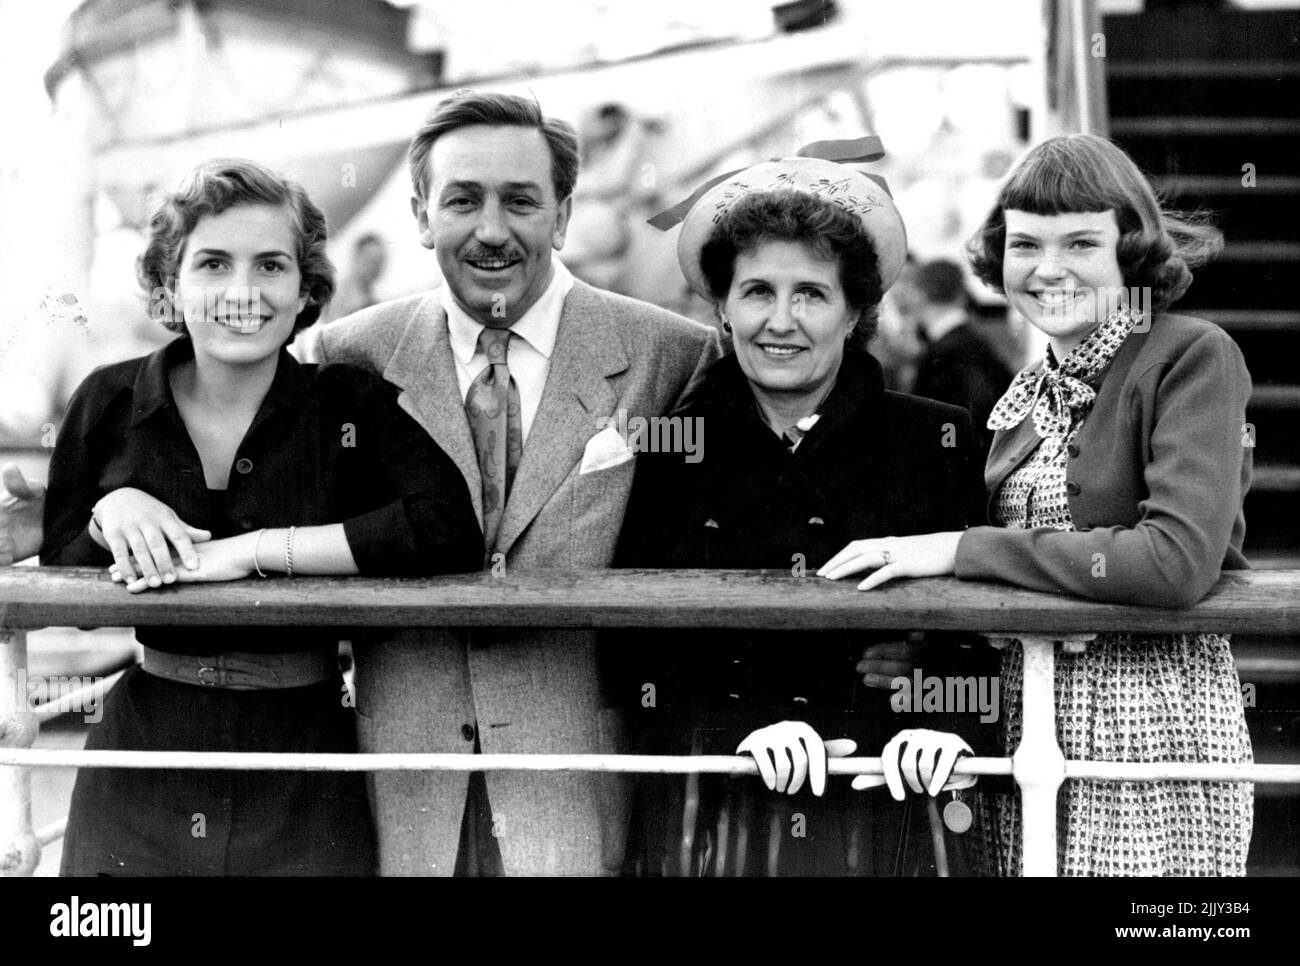 Britain Is 'Treasure Island' For The Disneys - Mr and Mrs. Walt Disney with daughters Diane (left) and Sharon (right) on arrival at Southampton. Accompanied by his wife and daughters - Diane, 16, and Sharon, 13 - Hollywood cartoon film producer Walt Disney arrived at Southamption aboard the Cunard-White Star liner 'Queen Elizabeth'. Disney, creator of Mickey Mouse, Donald Duck and a host of other cartoon characters, has come to Britain to make 'Treasure Island' (his first all-live film) at Denham. June 21, 1949. (Photo by Reuterphoto). Stock Photo